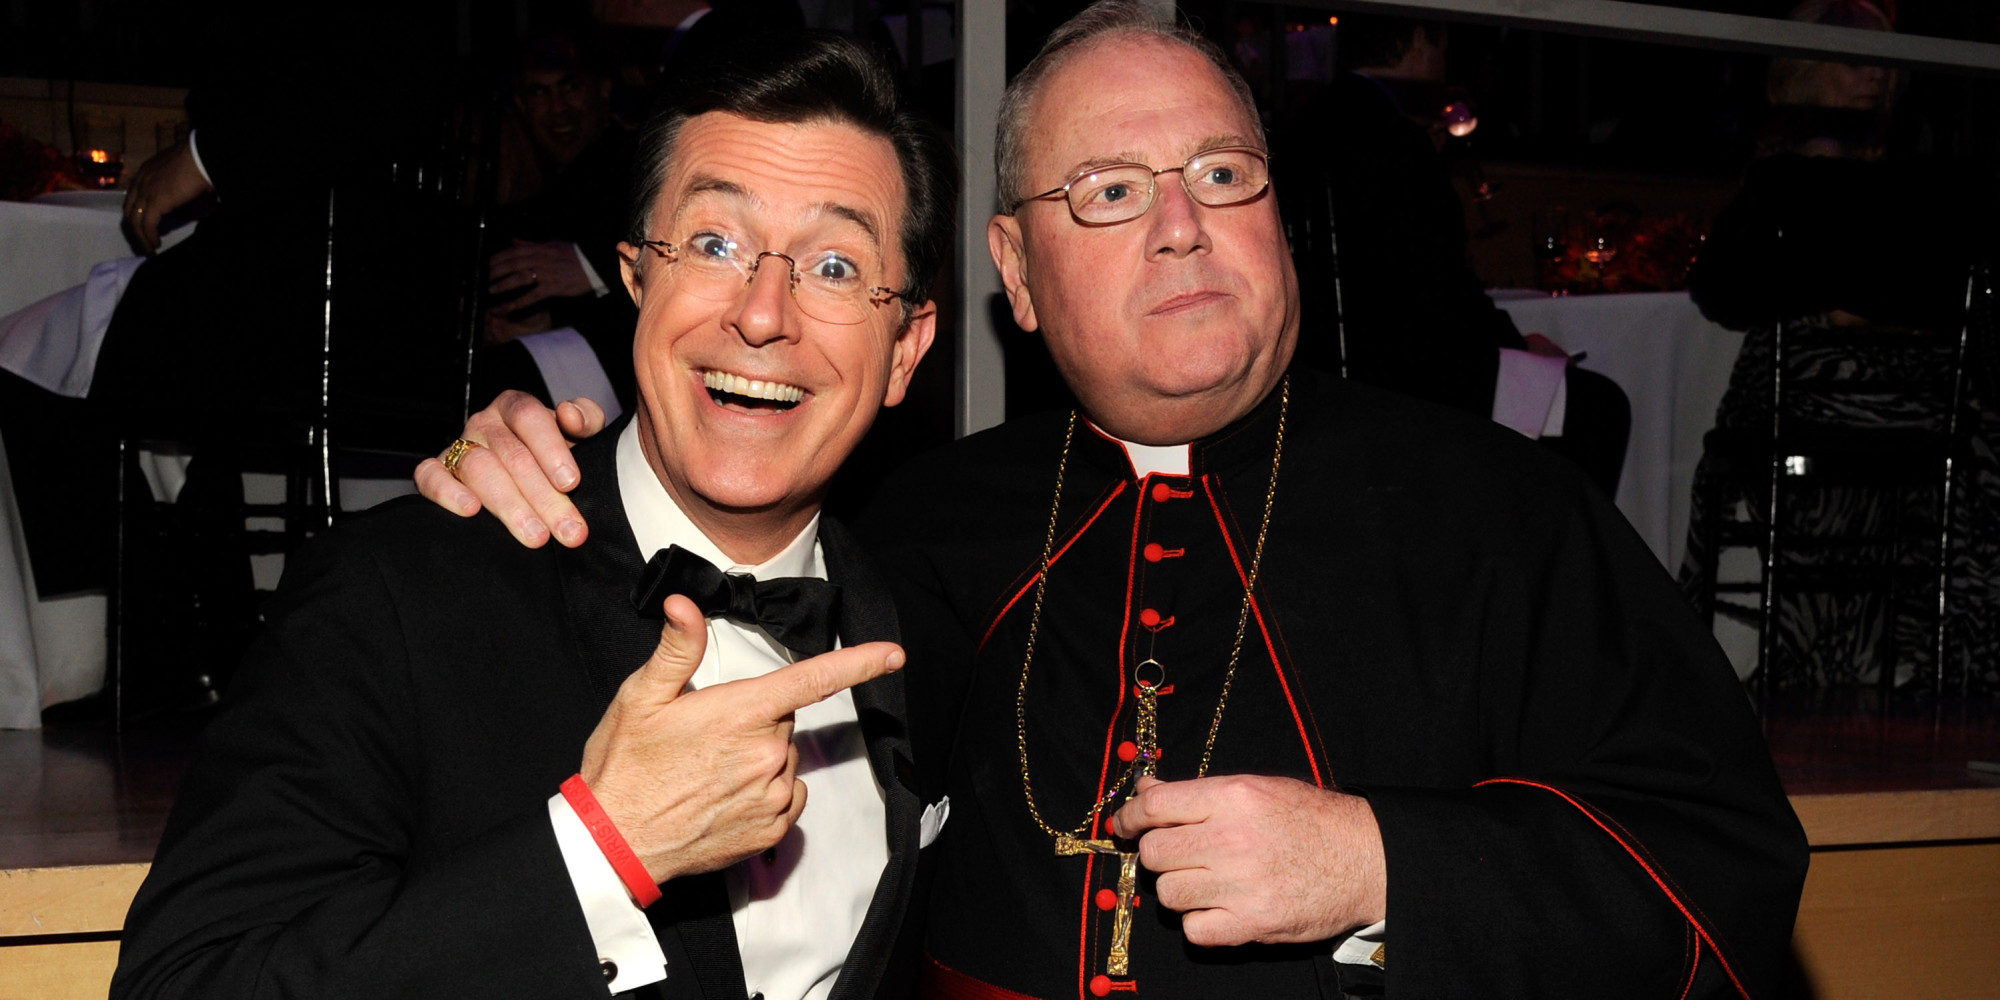 Stephen Colberts Best Catholic Quotes Americas Most Influential Catholic Gets Invite To Al 